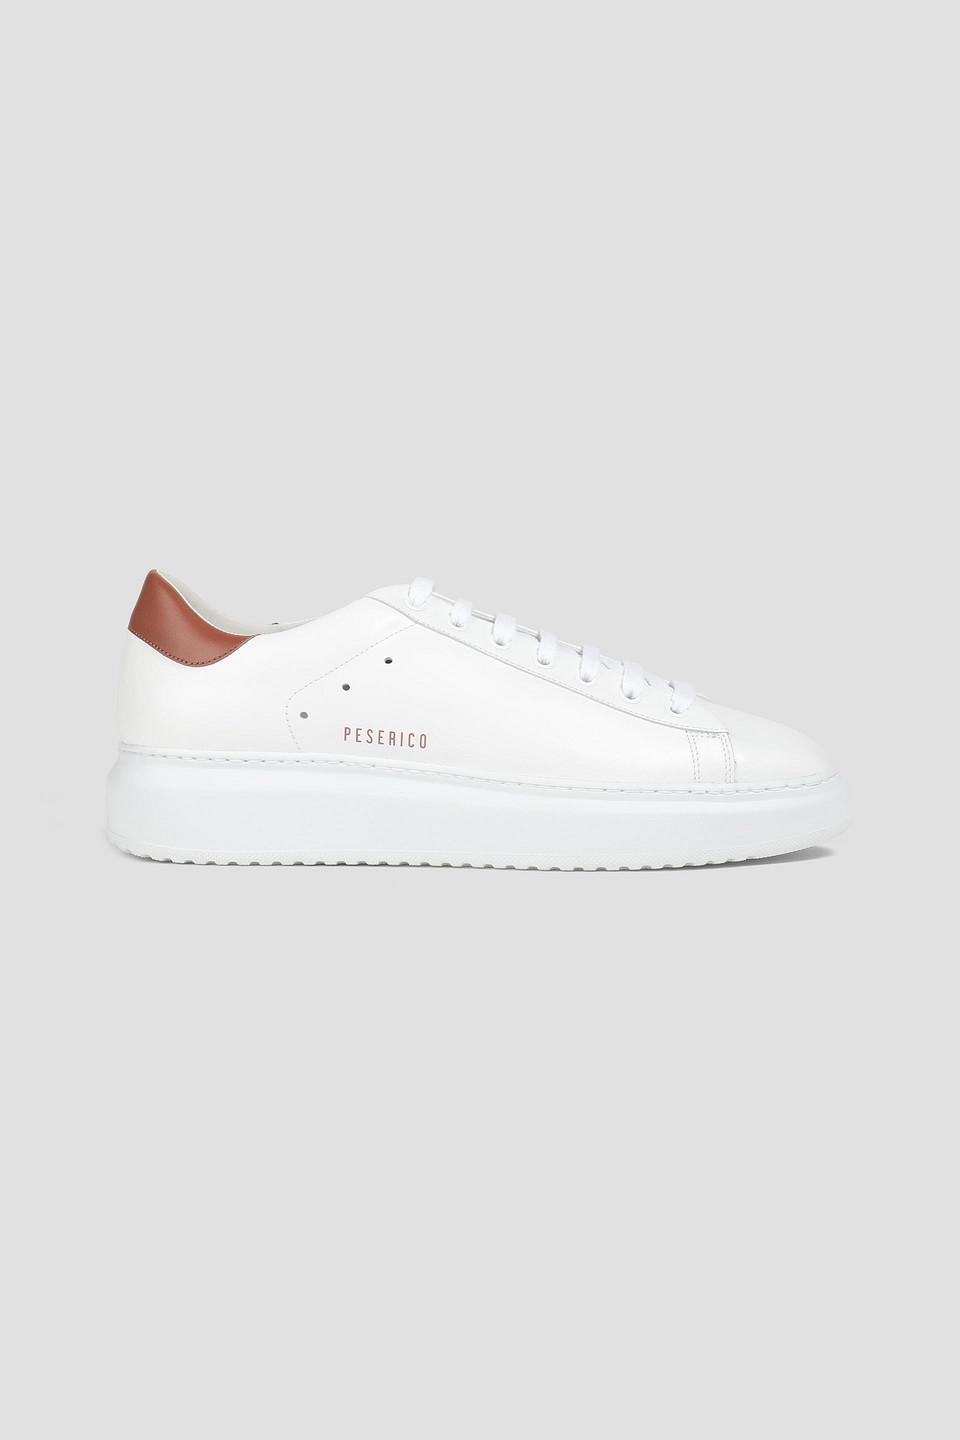 Peserico Perforated Logo-print Leather Sneakers in White for Men | Lyst